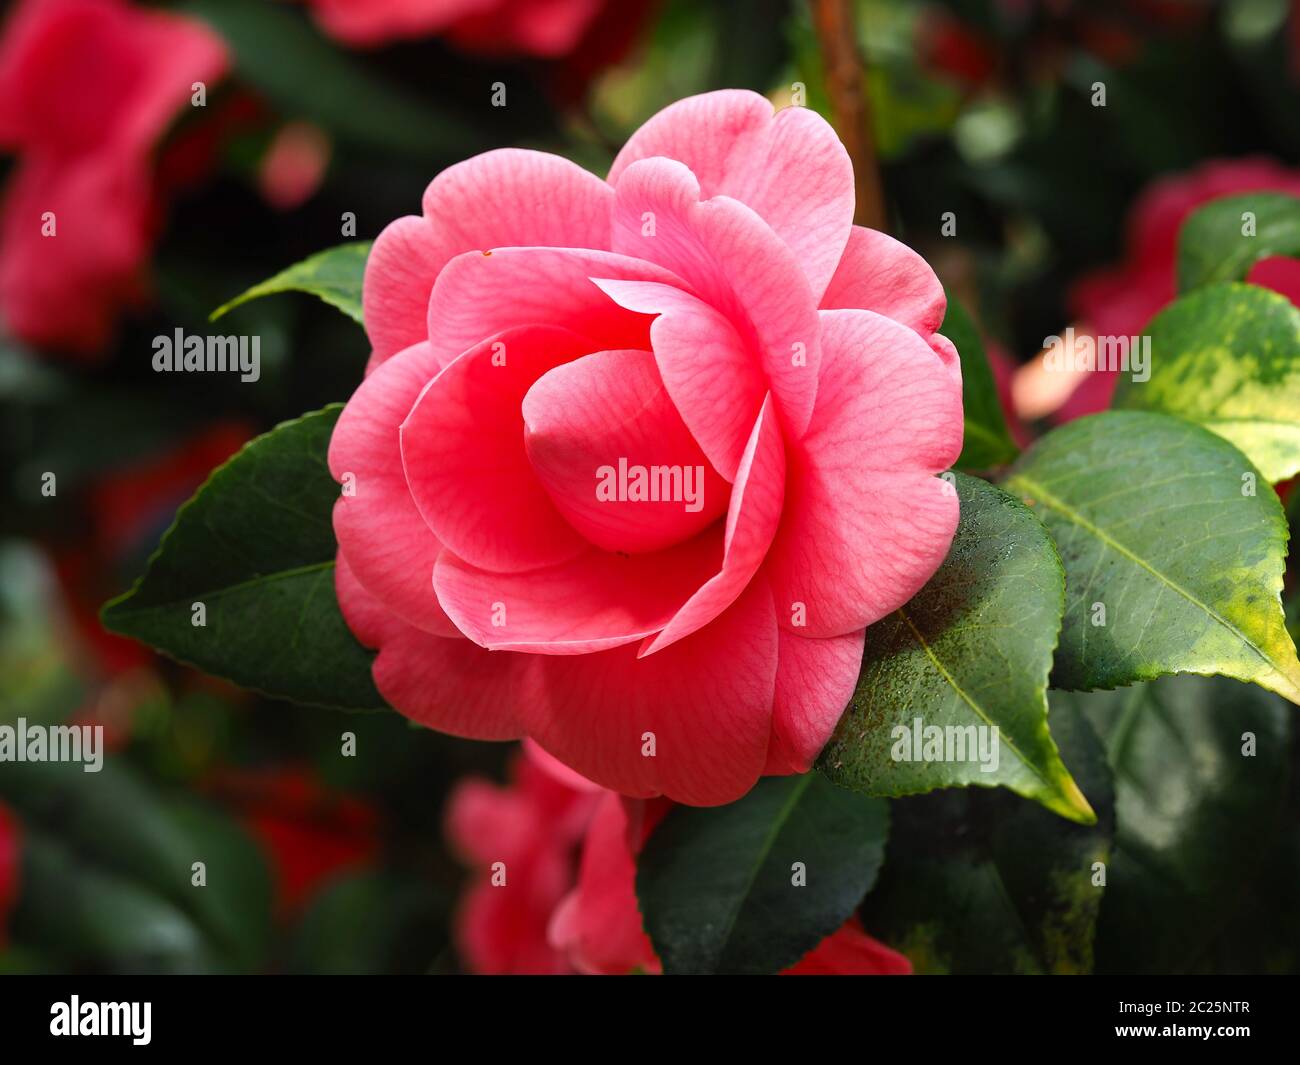 Closeup of a beautiful pink Camellia flower with variegated green leaves Stock Photo